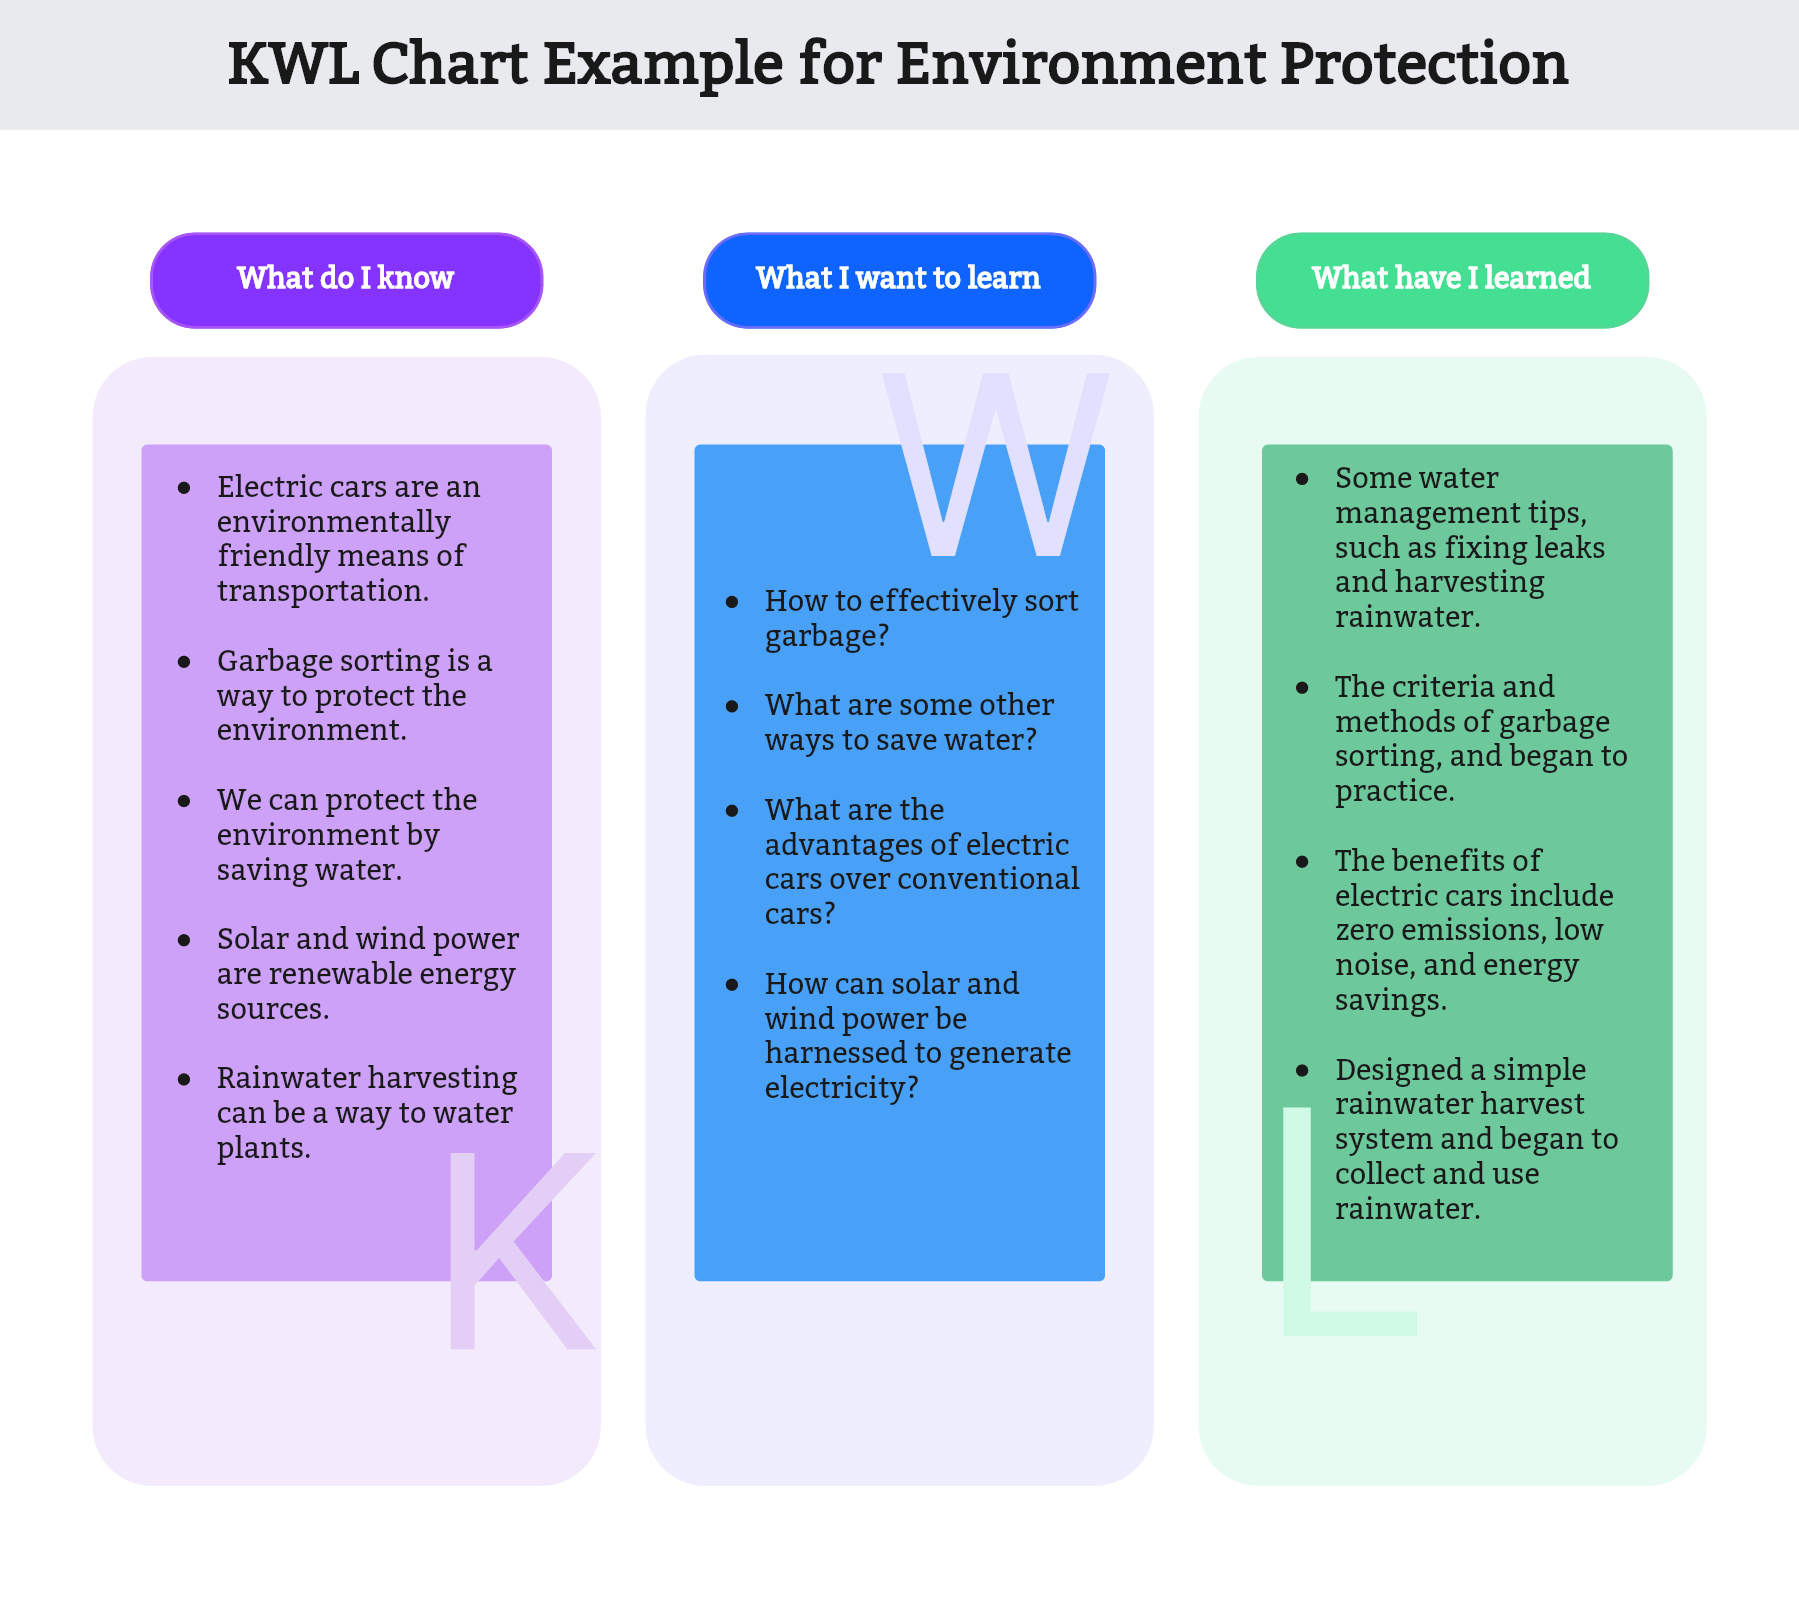 kwl chart example environment protection